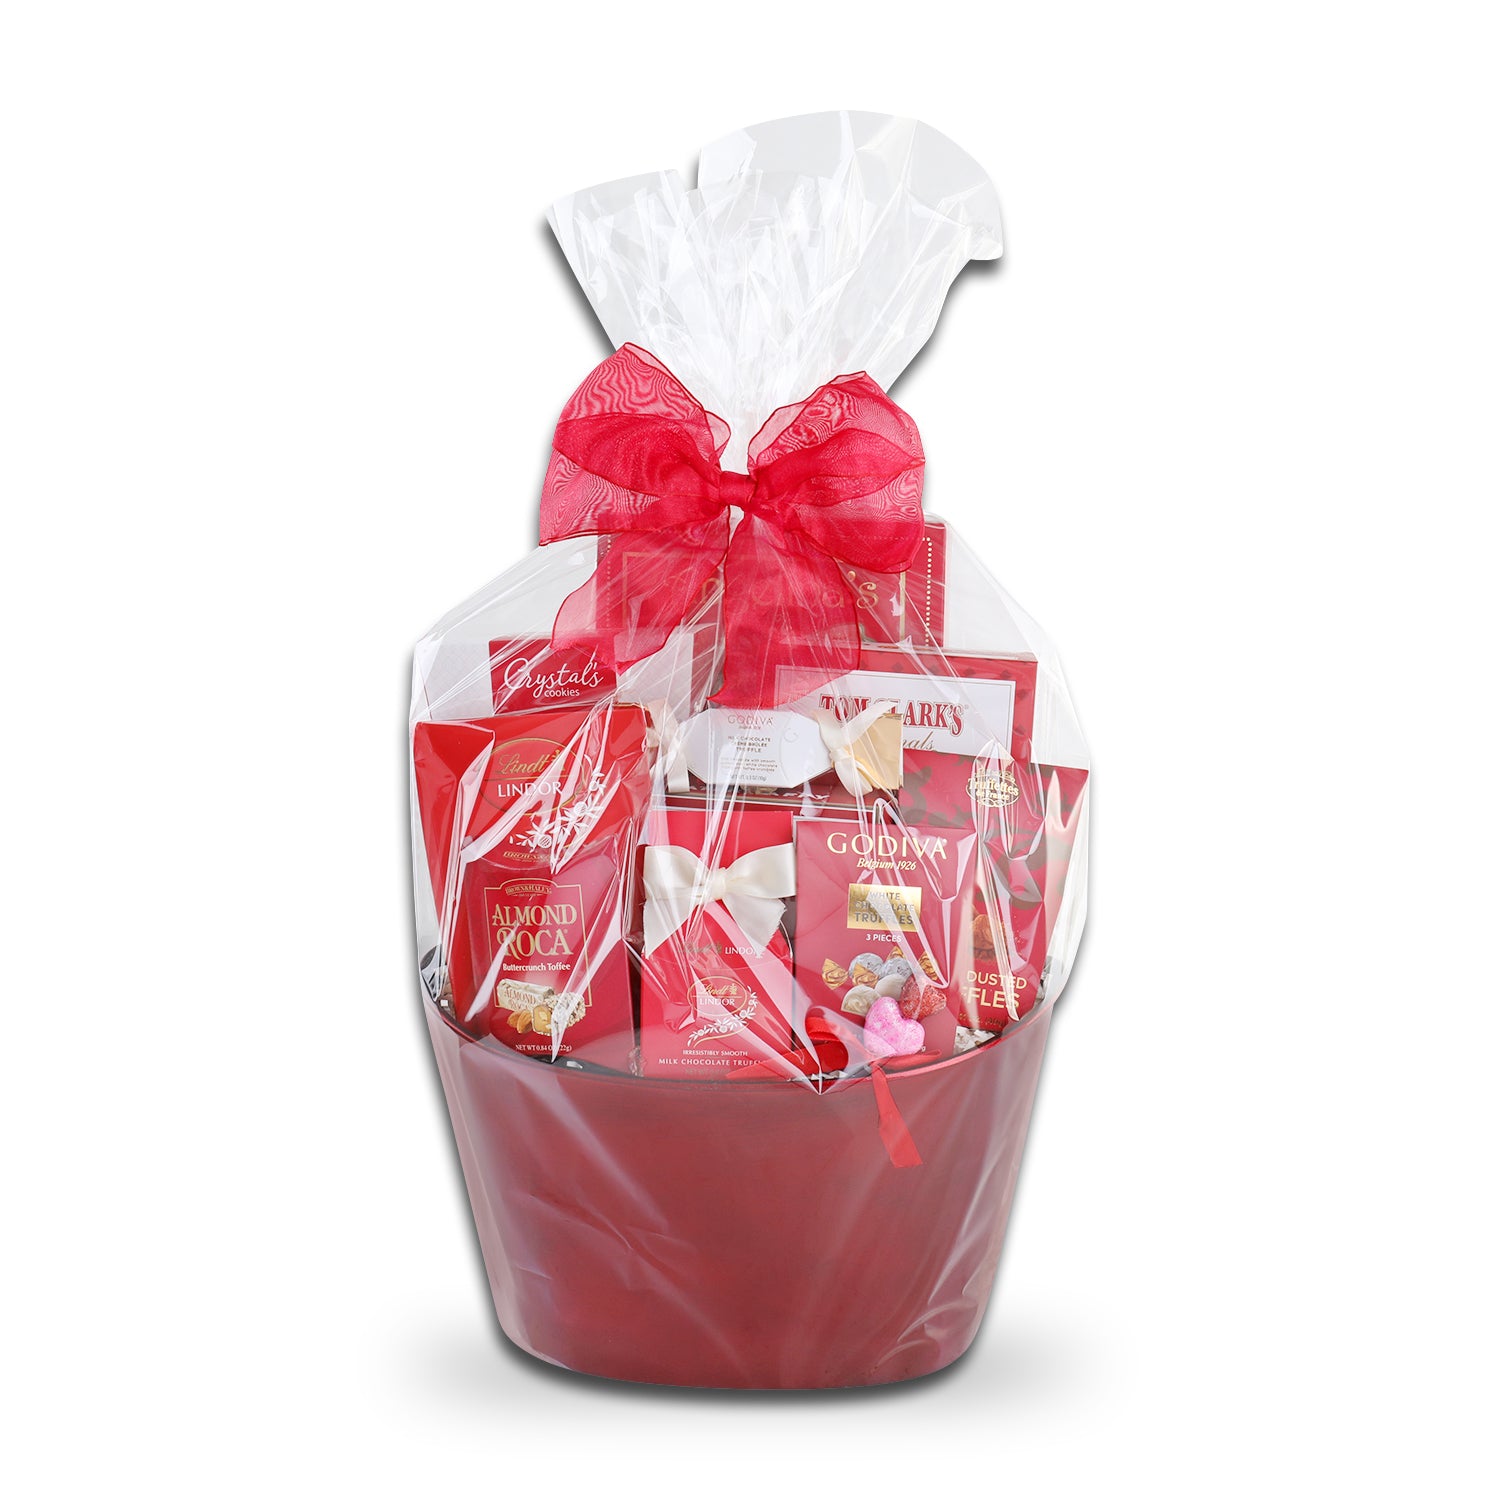 Gift basket wrapped in plastic and tied with red bow